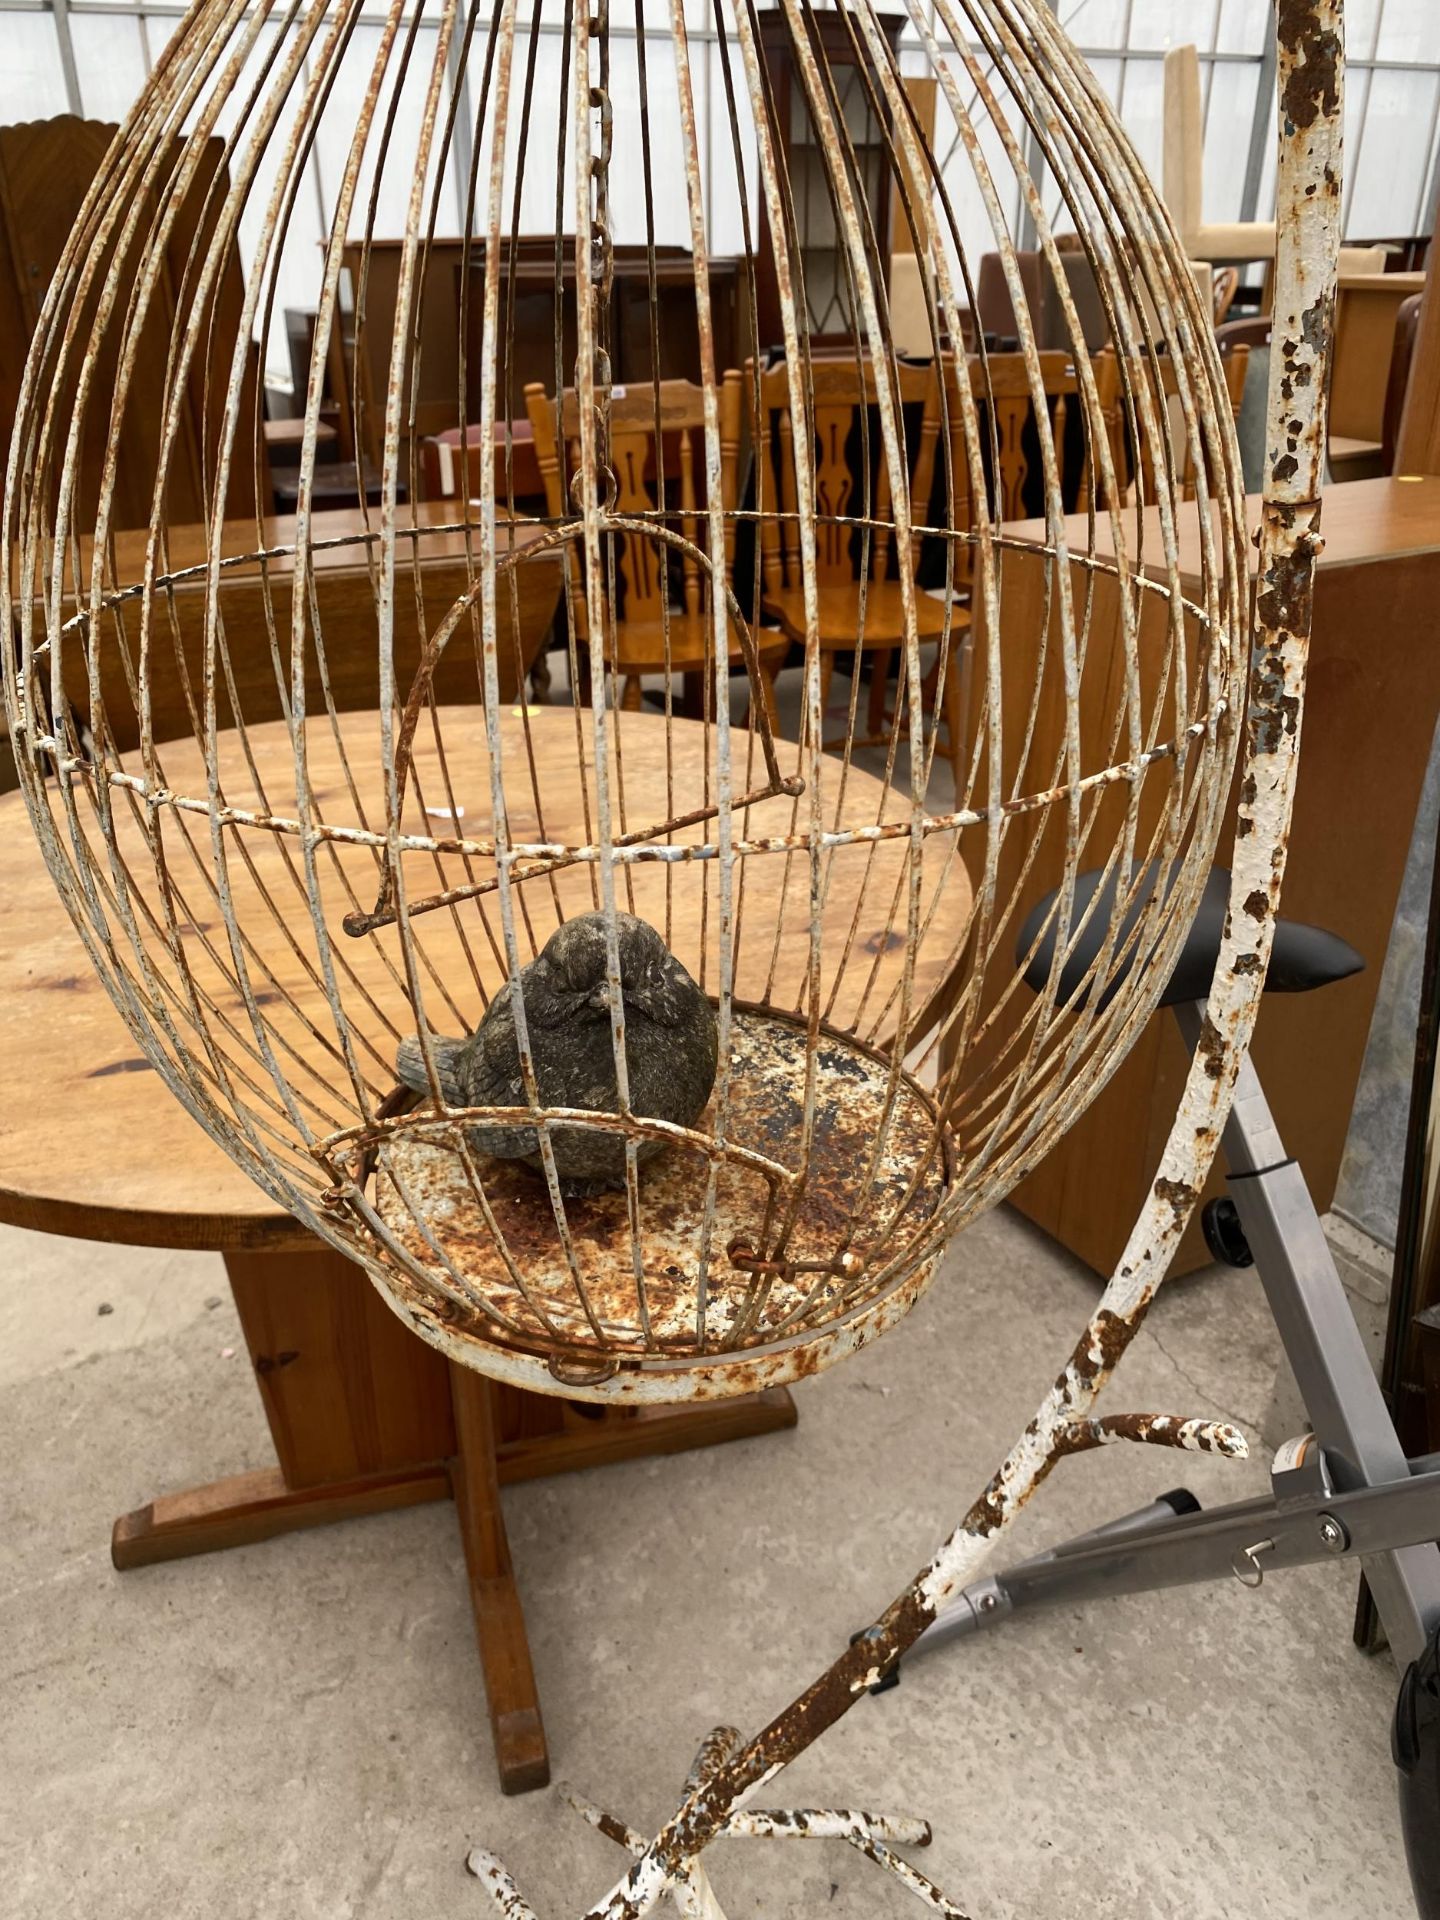 A DECORATIVE BIRD CAGE ON A LARGE DECORATIVE WROUGHT IRON STAND - Image 3 of 4